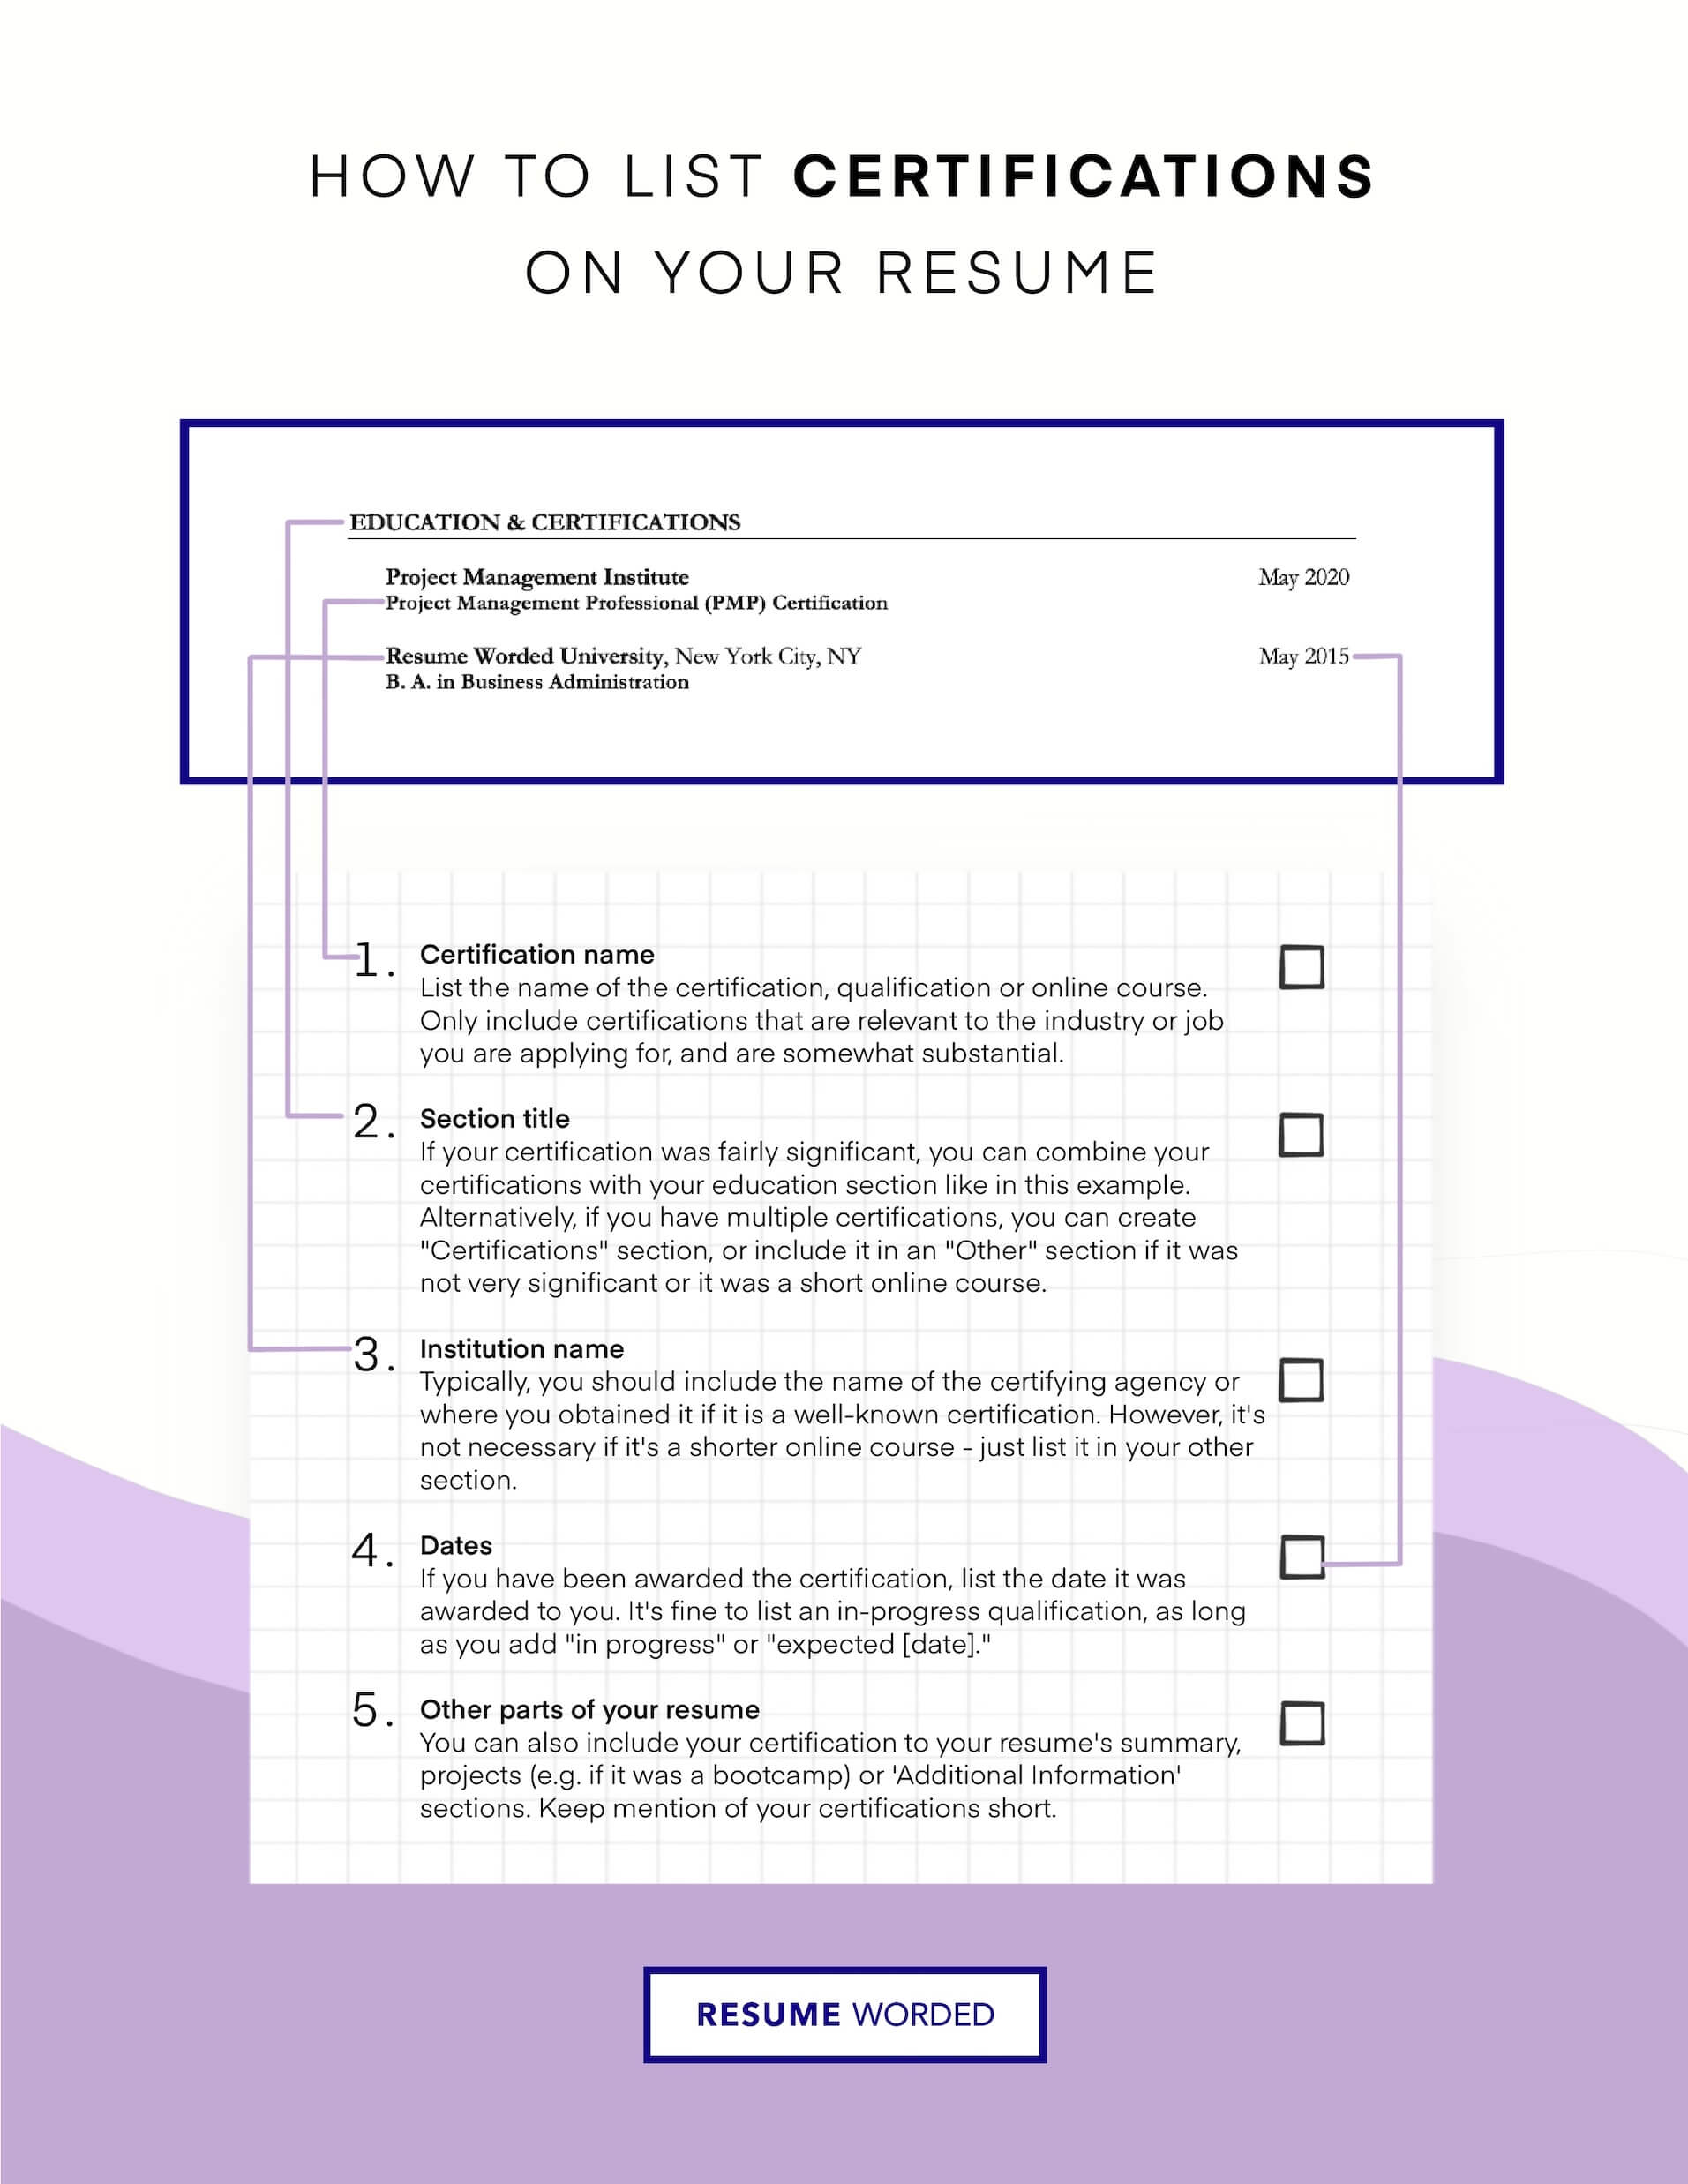 Showcase your certifications - Certified Dental Assistant Resume